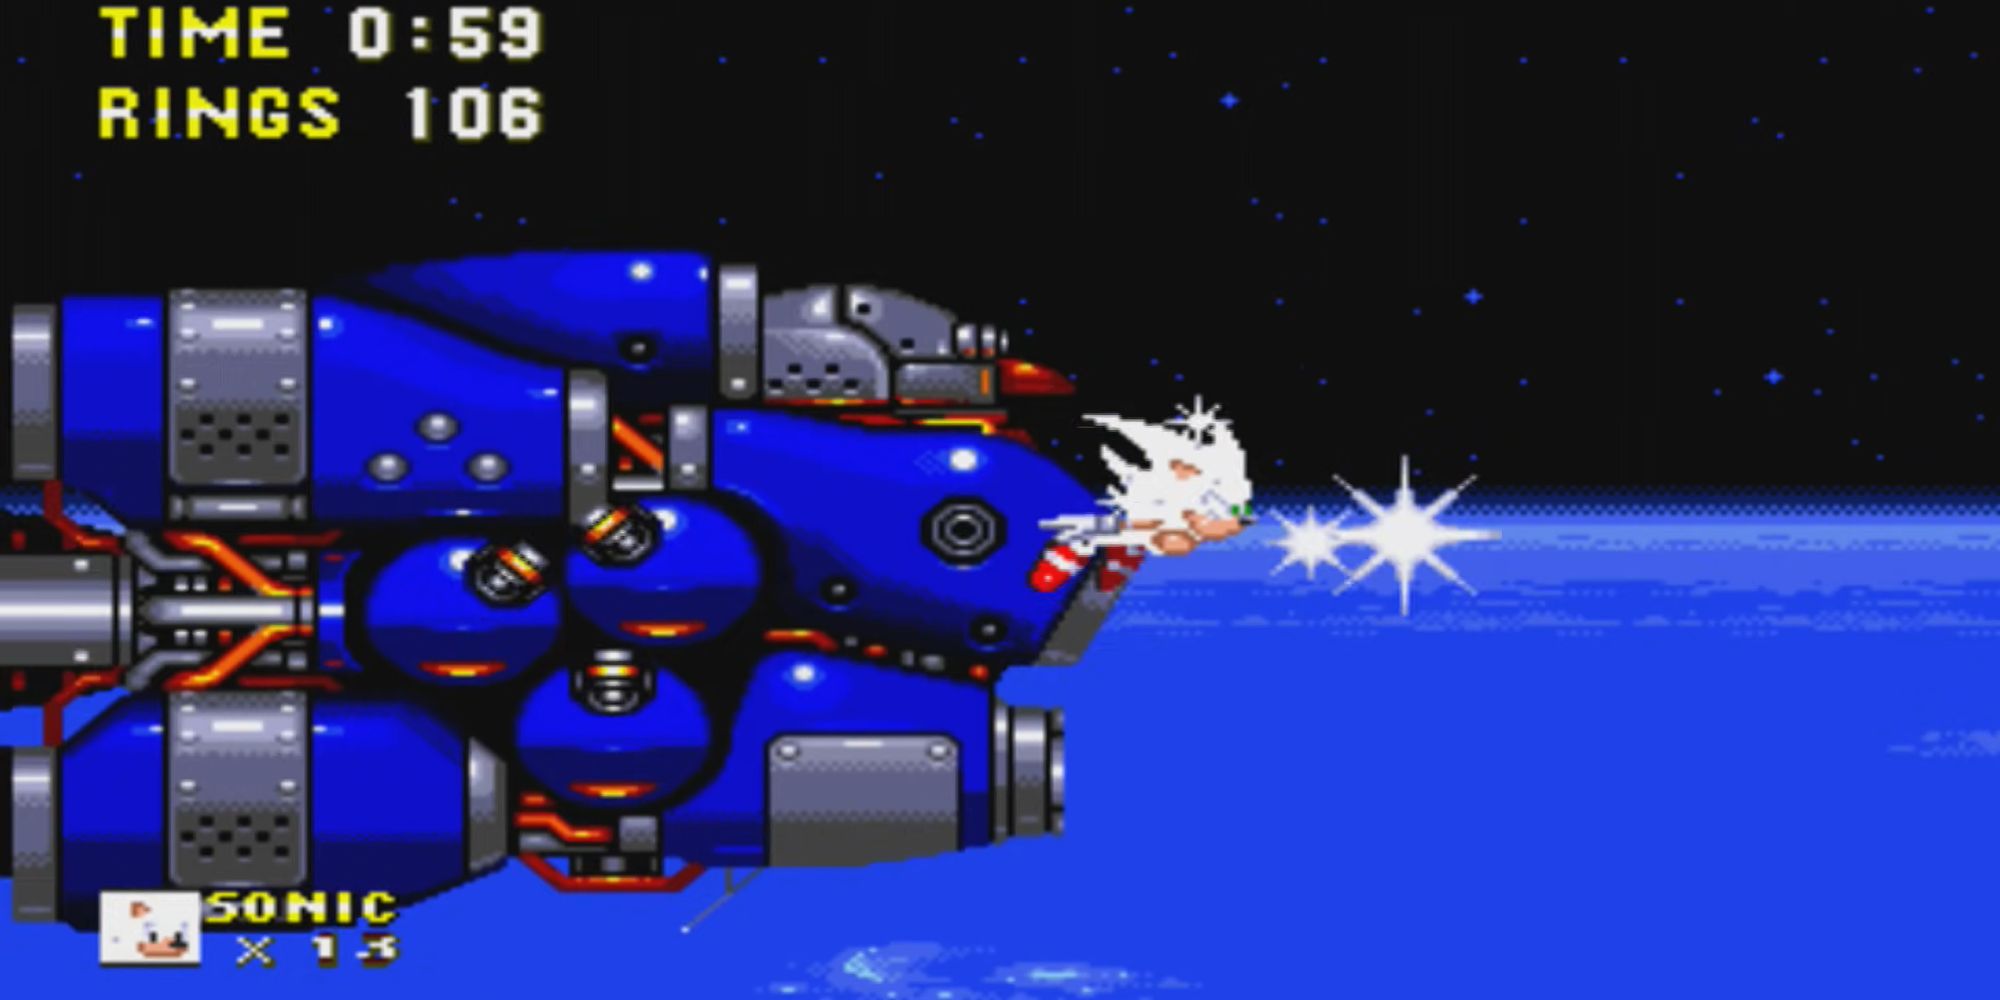 Sonic & Knuckles (Sonic 3 & Knuckles) - Hyper Sonic fighting the Final Weapon in Outer Space